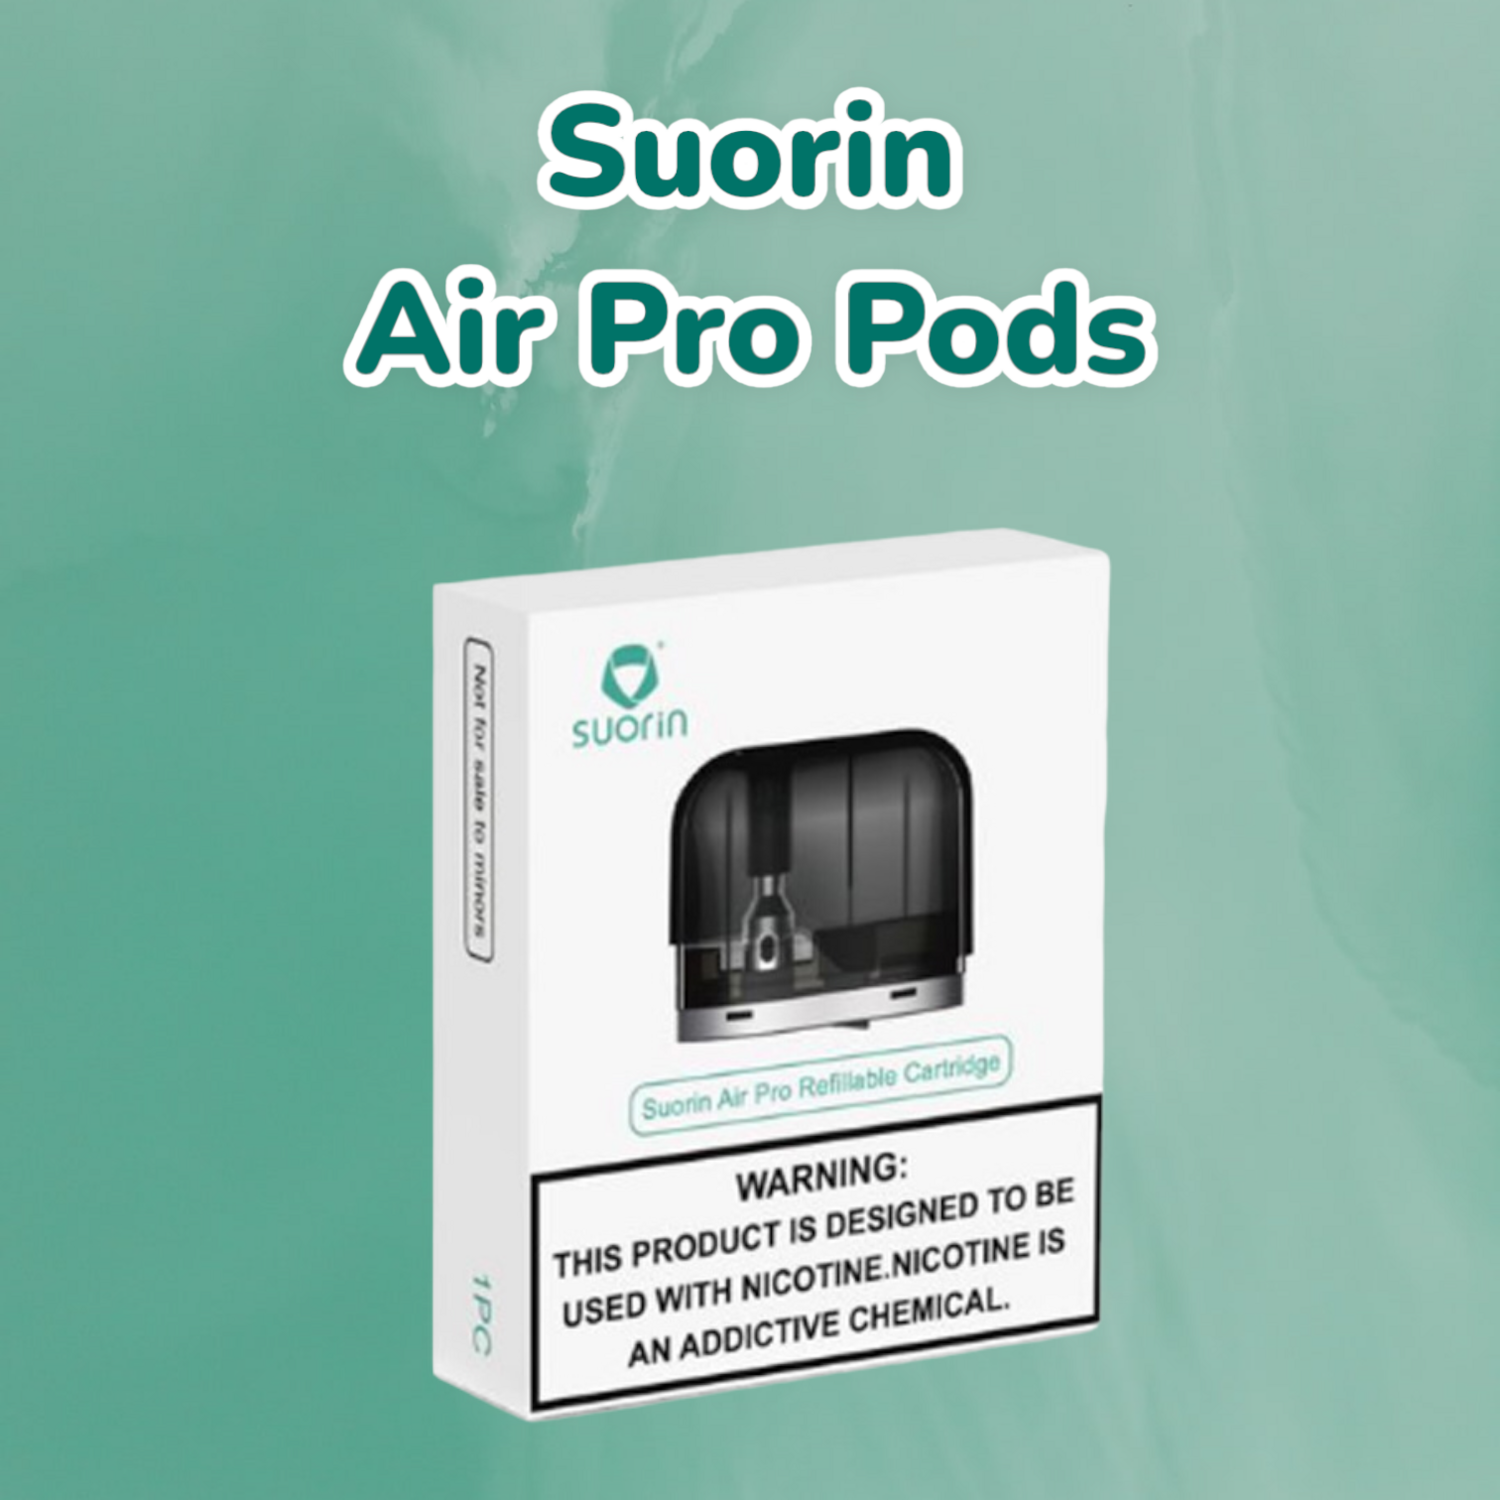 Suorin Air Pro Pods